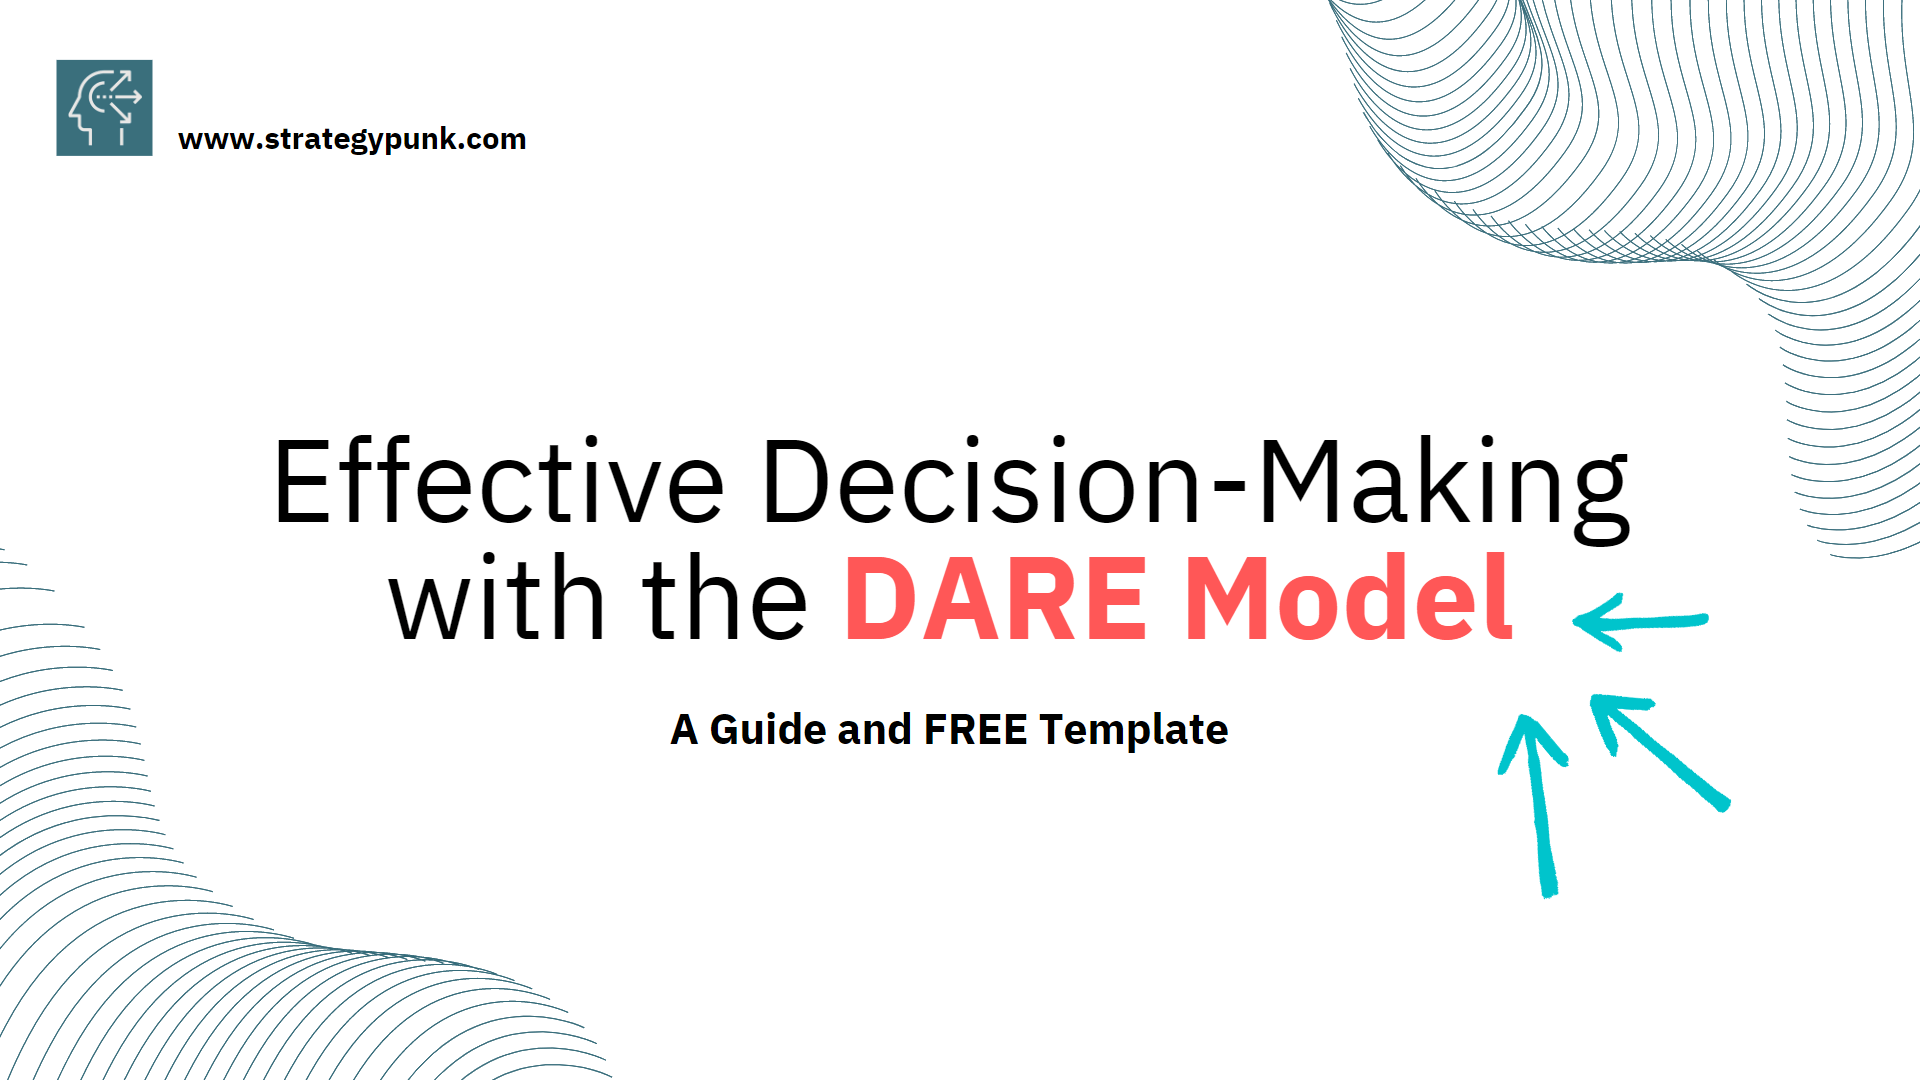 Master Effective Decision-Making with the DARE Model: A Guide and Template